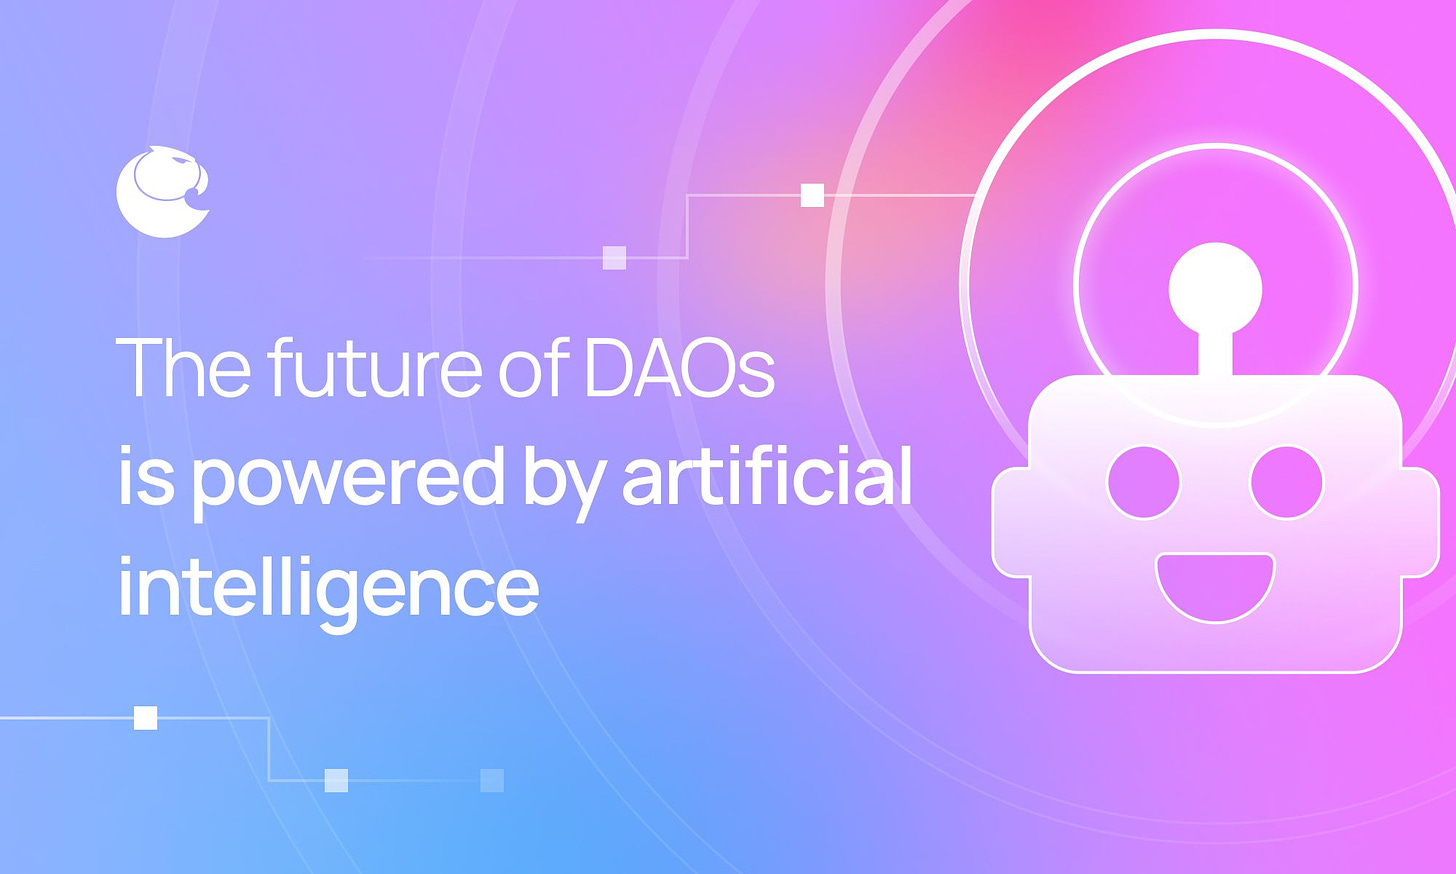 The future of DAOs is powered by artificial intelligence